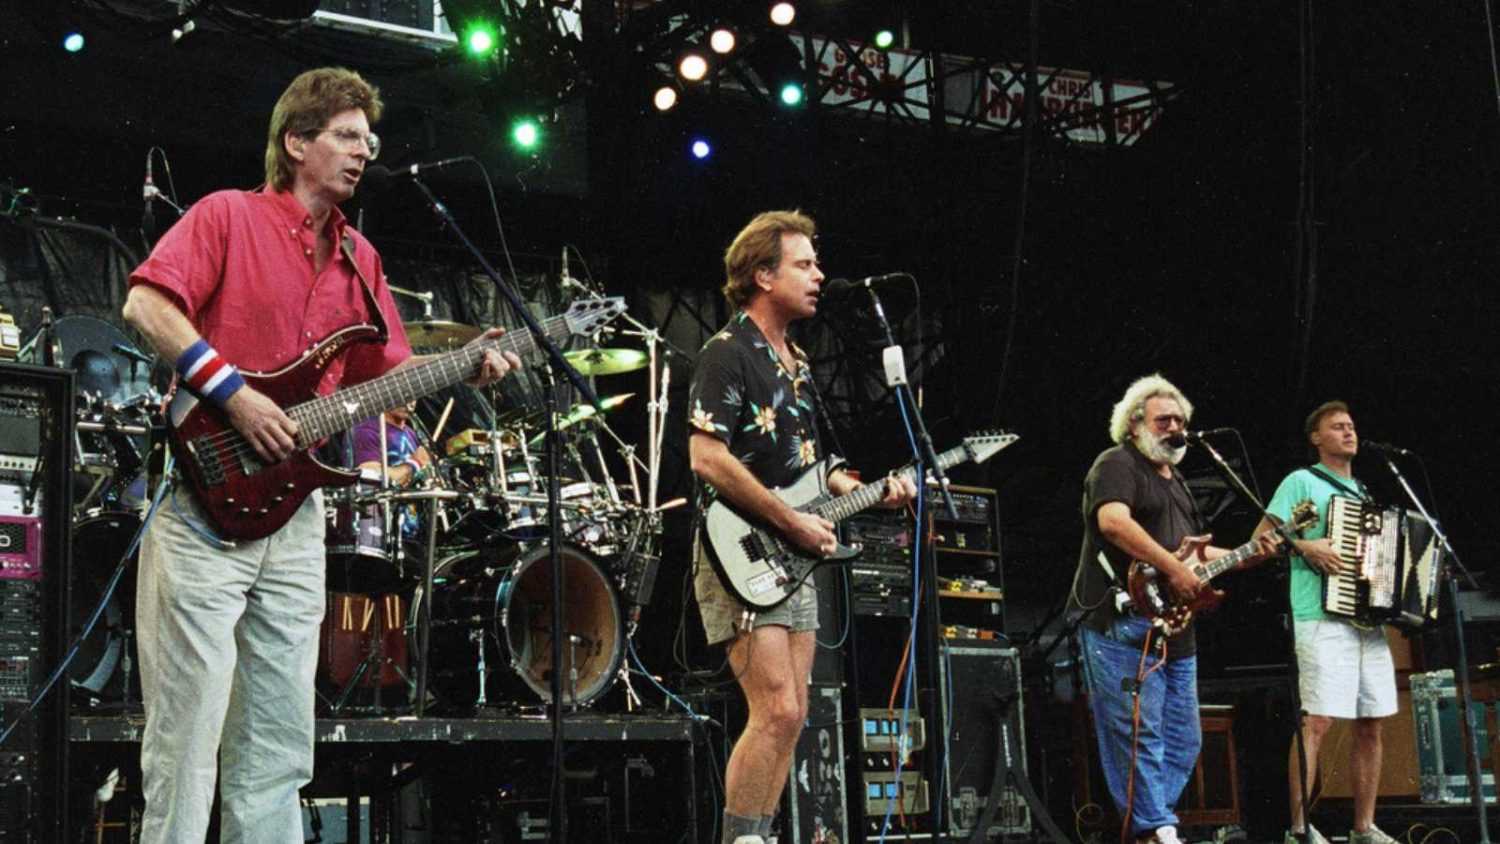 WASHINGTON, D.C. - JUNE 20: The Grateful Dead in concert in Washington, D.C., on Saturday, June 20, 1992. From left, Phil Lesh, Bob Wier, Jerry Garcia, and Bruce Hornsby.